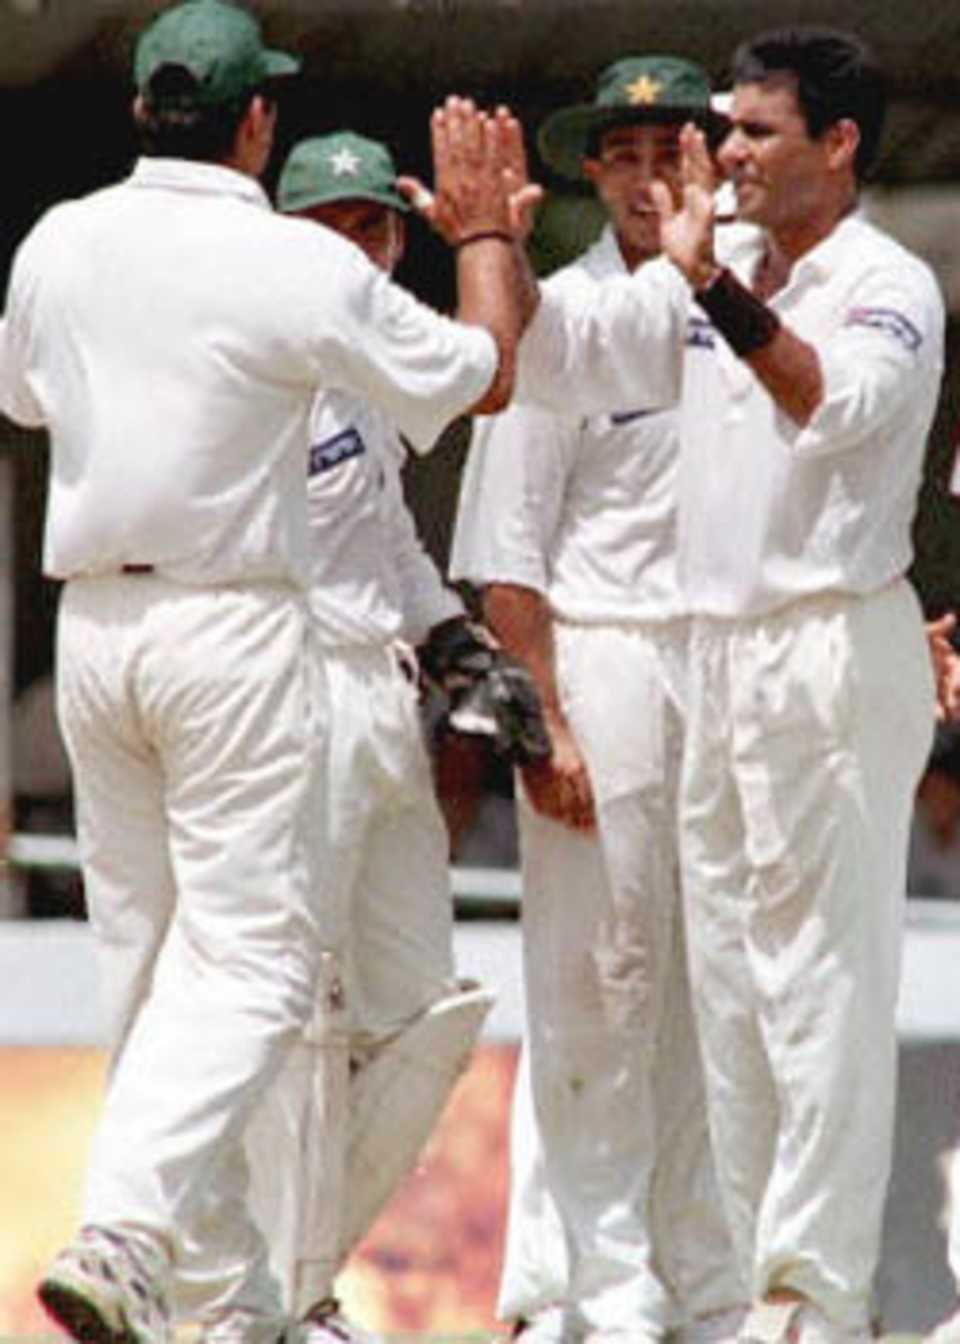 Pakistani bowler Waqar Younis (R) celebrates with teammates during the fourth day of the second Test against Sri Lanka played at Galle international cricket stadium. Pakistan won the match by an innings and 163 runs to take an unbeatable 2-0 lead in the three match series. Pakistan in Sri Lanka, 1999/00, 2nd Test, Sri Lanka v Pakistan, Galle International Stadium, 21-25 June 2000 (Day 4).